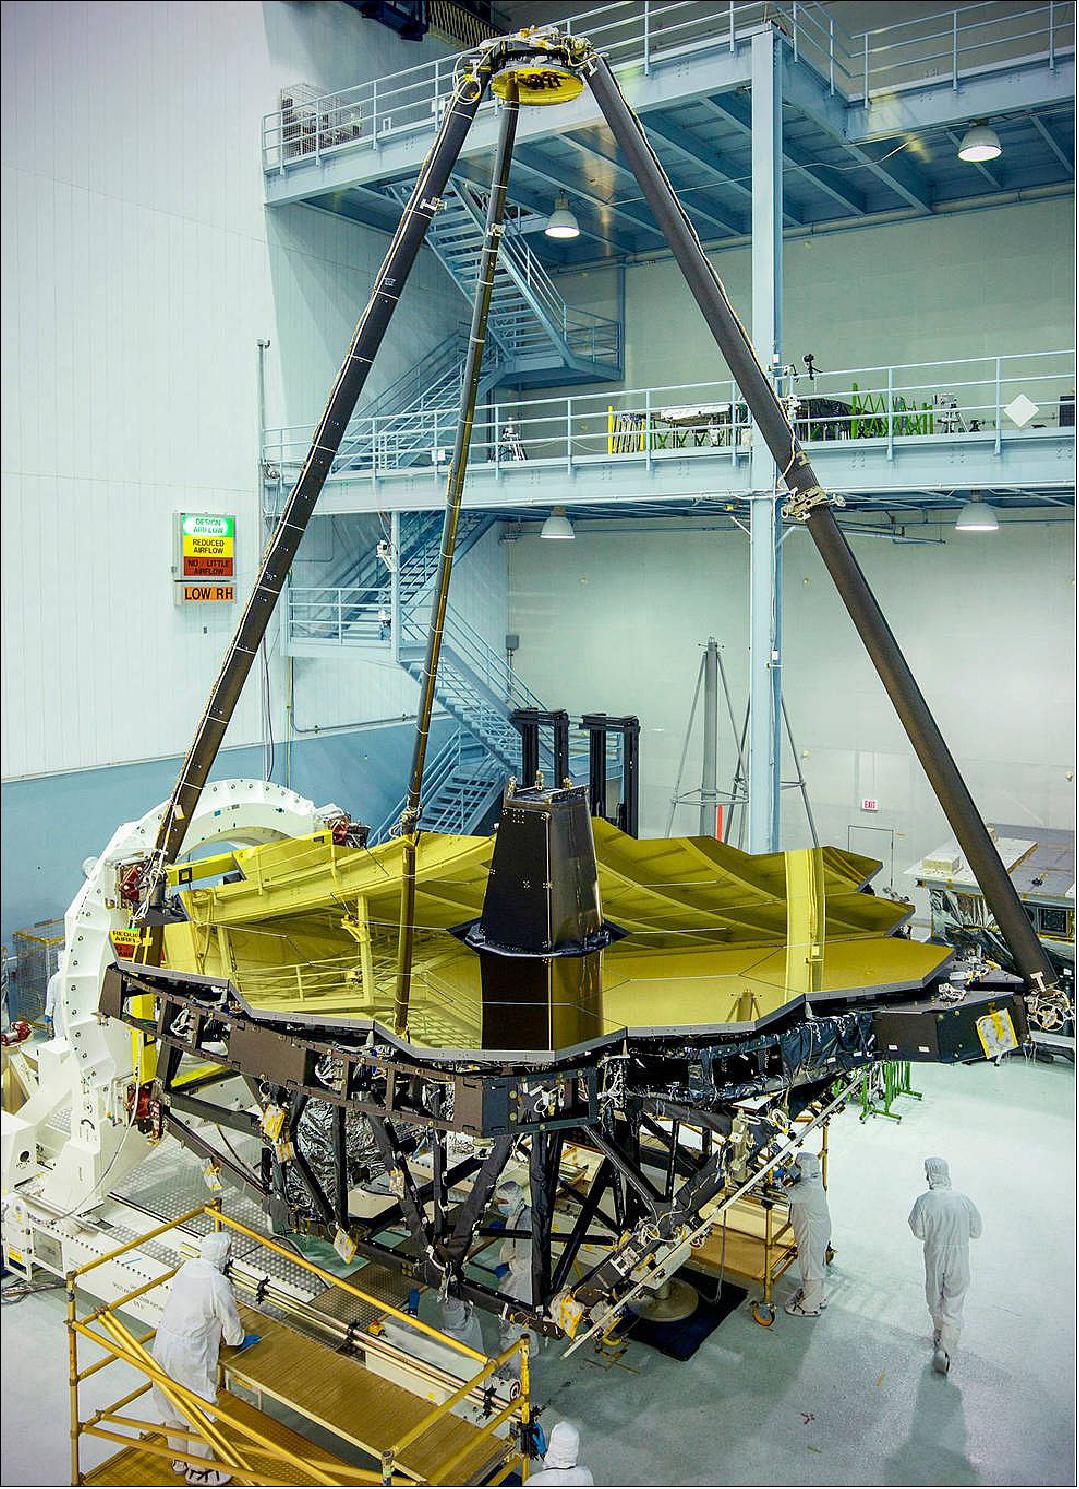 Figure 59: Standing tall and glimmering gold inside the NASA/GSFC clean room in Greenbelt, Maryland is the James Webb Space Telescope primary mirror. It will be the largest yet sent into space (image credit: NASA, Chris Gunn)